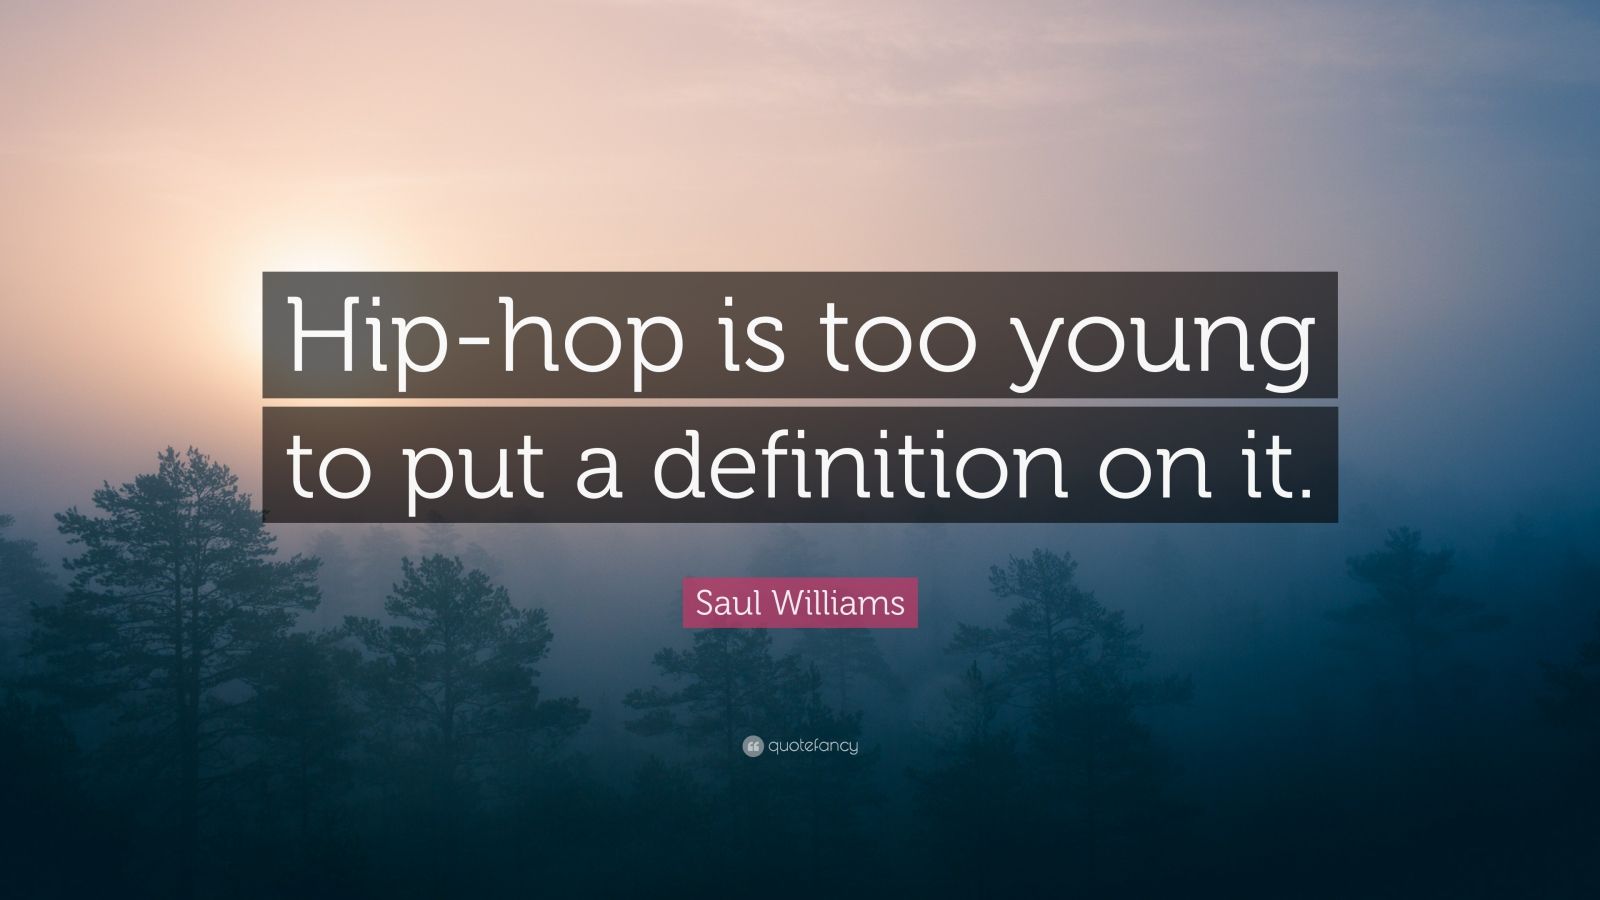 Saul Williams Quote: “Hip-hop is too young to put a definition on it